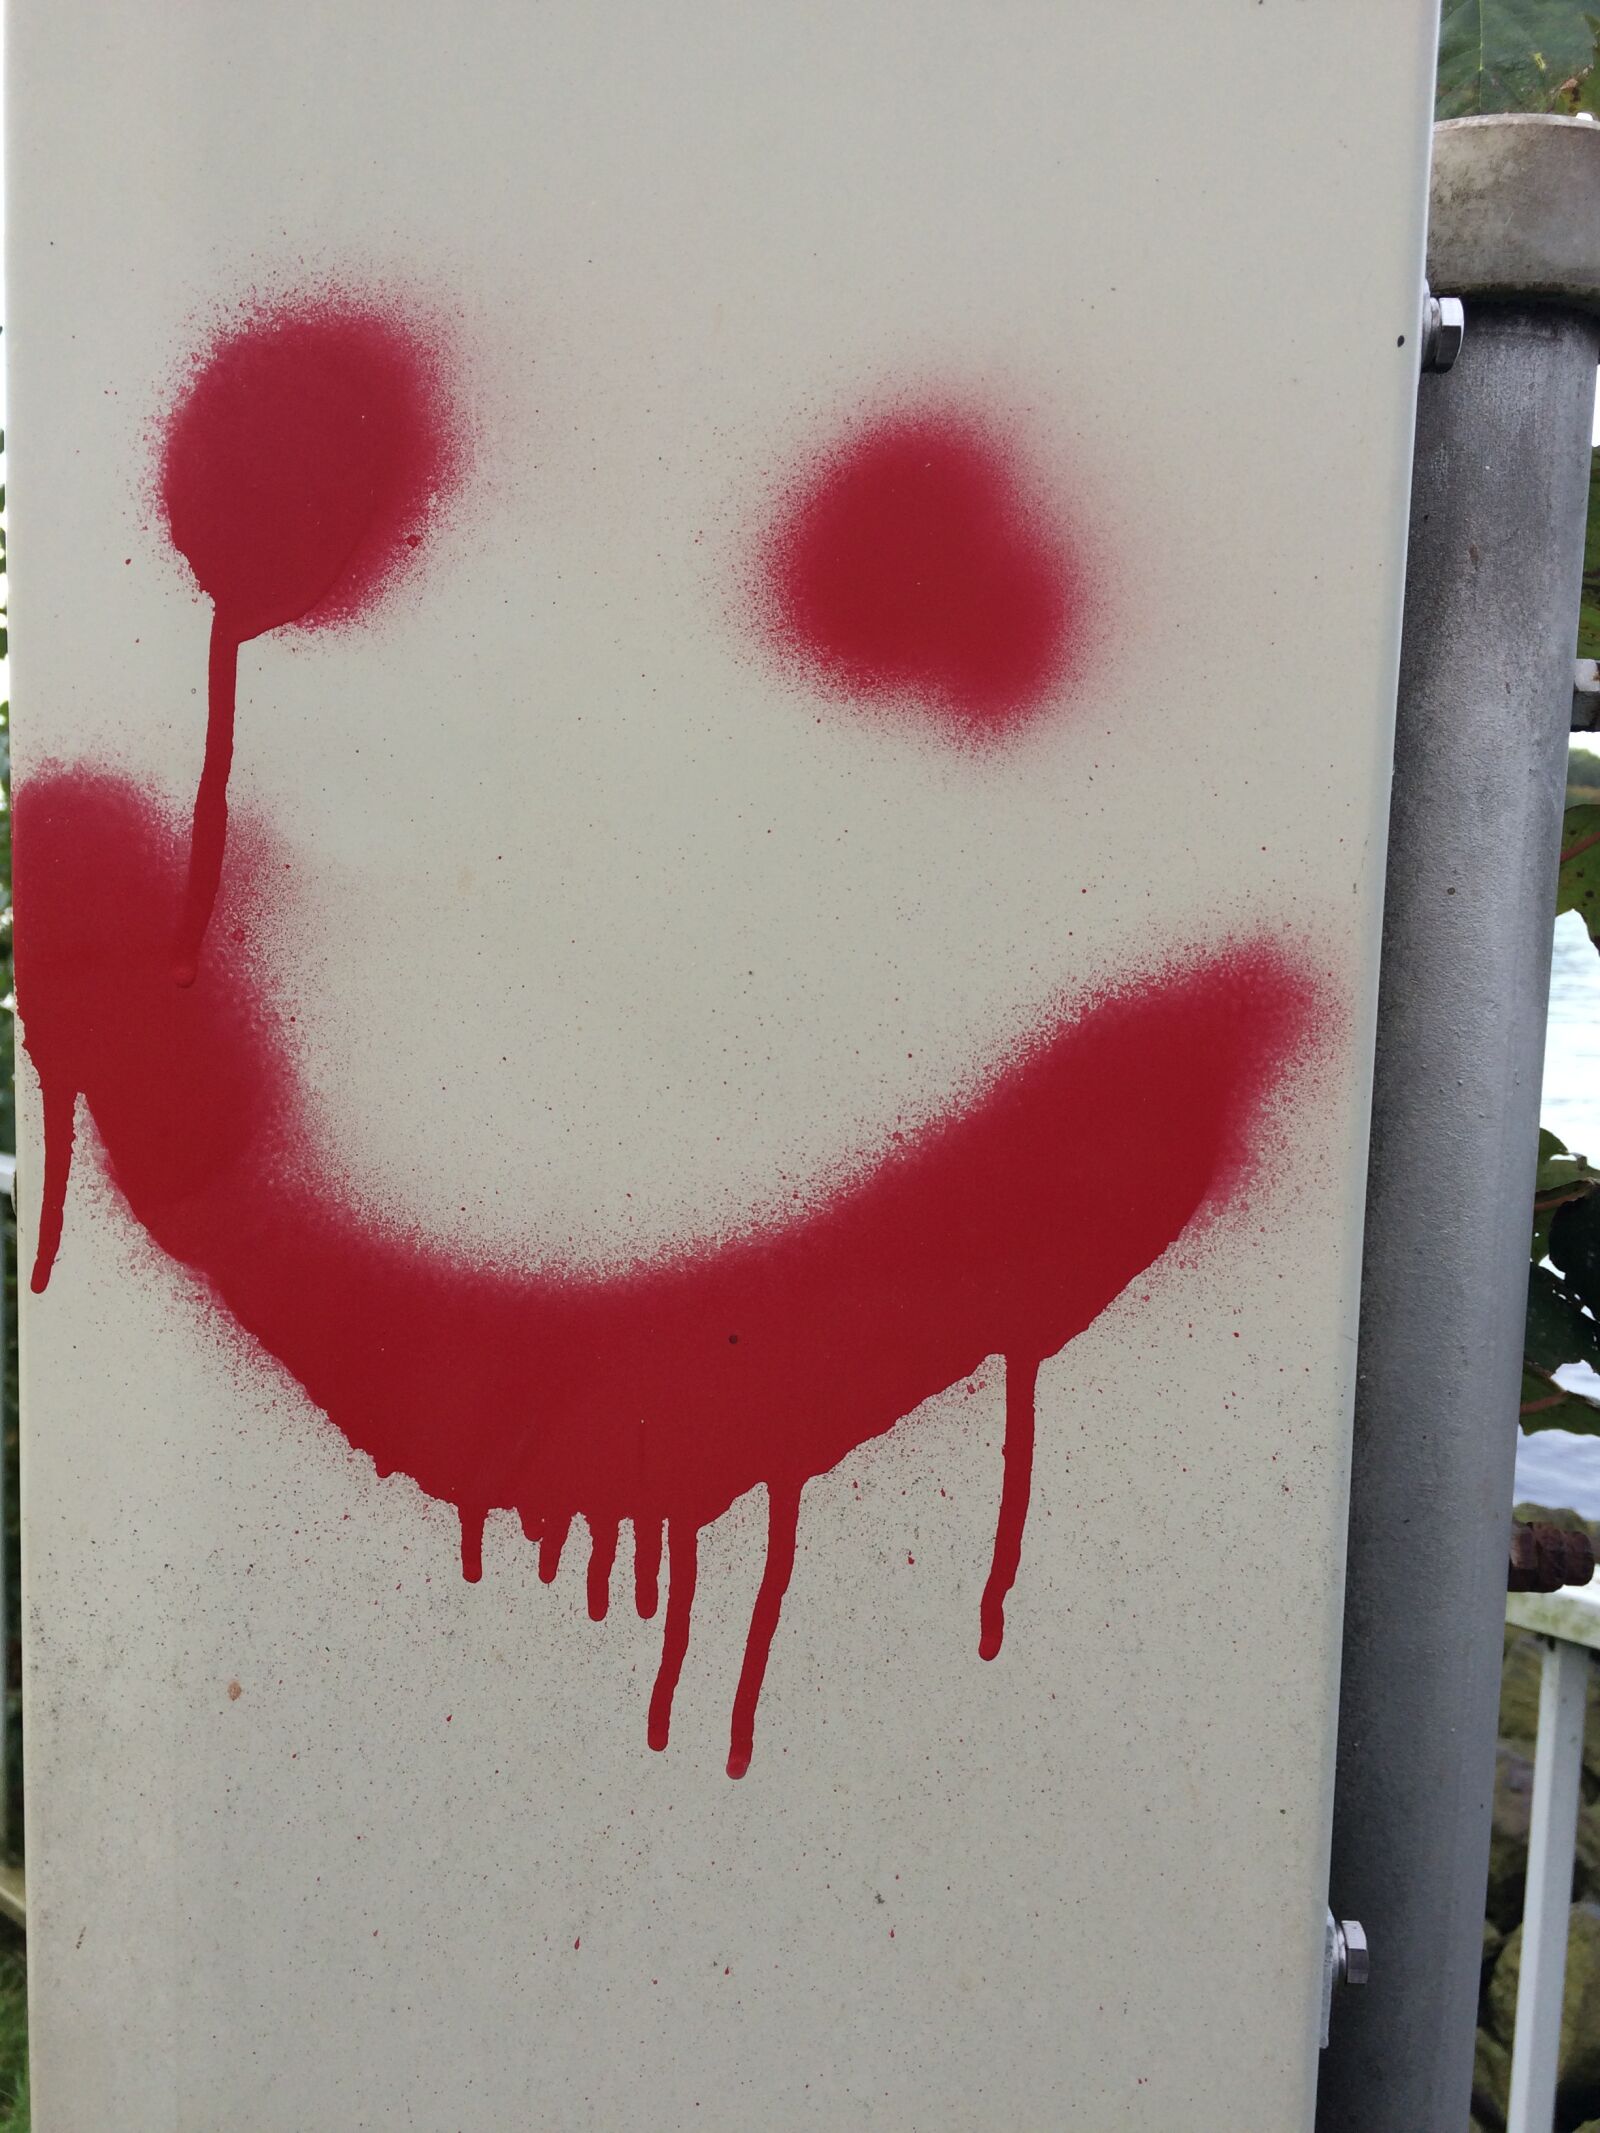 Apple iPhone 5s + iPhone 5s back camera 4.15mm f/2.2 sample photo. Smiley, graffiti, laugh photography